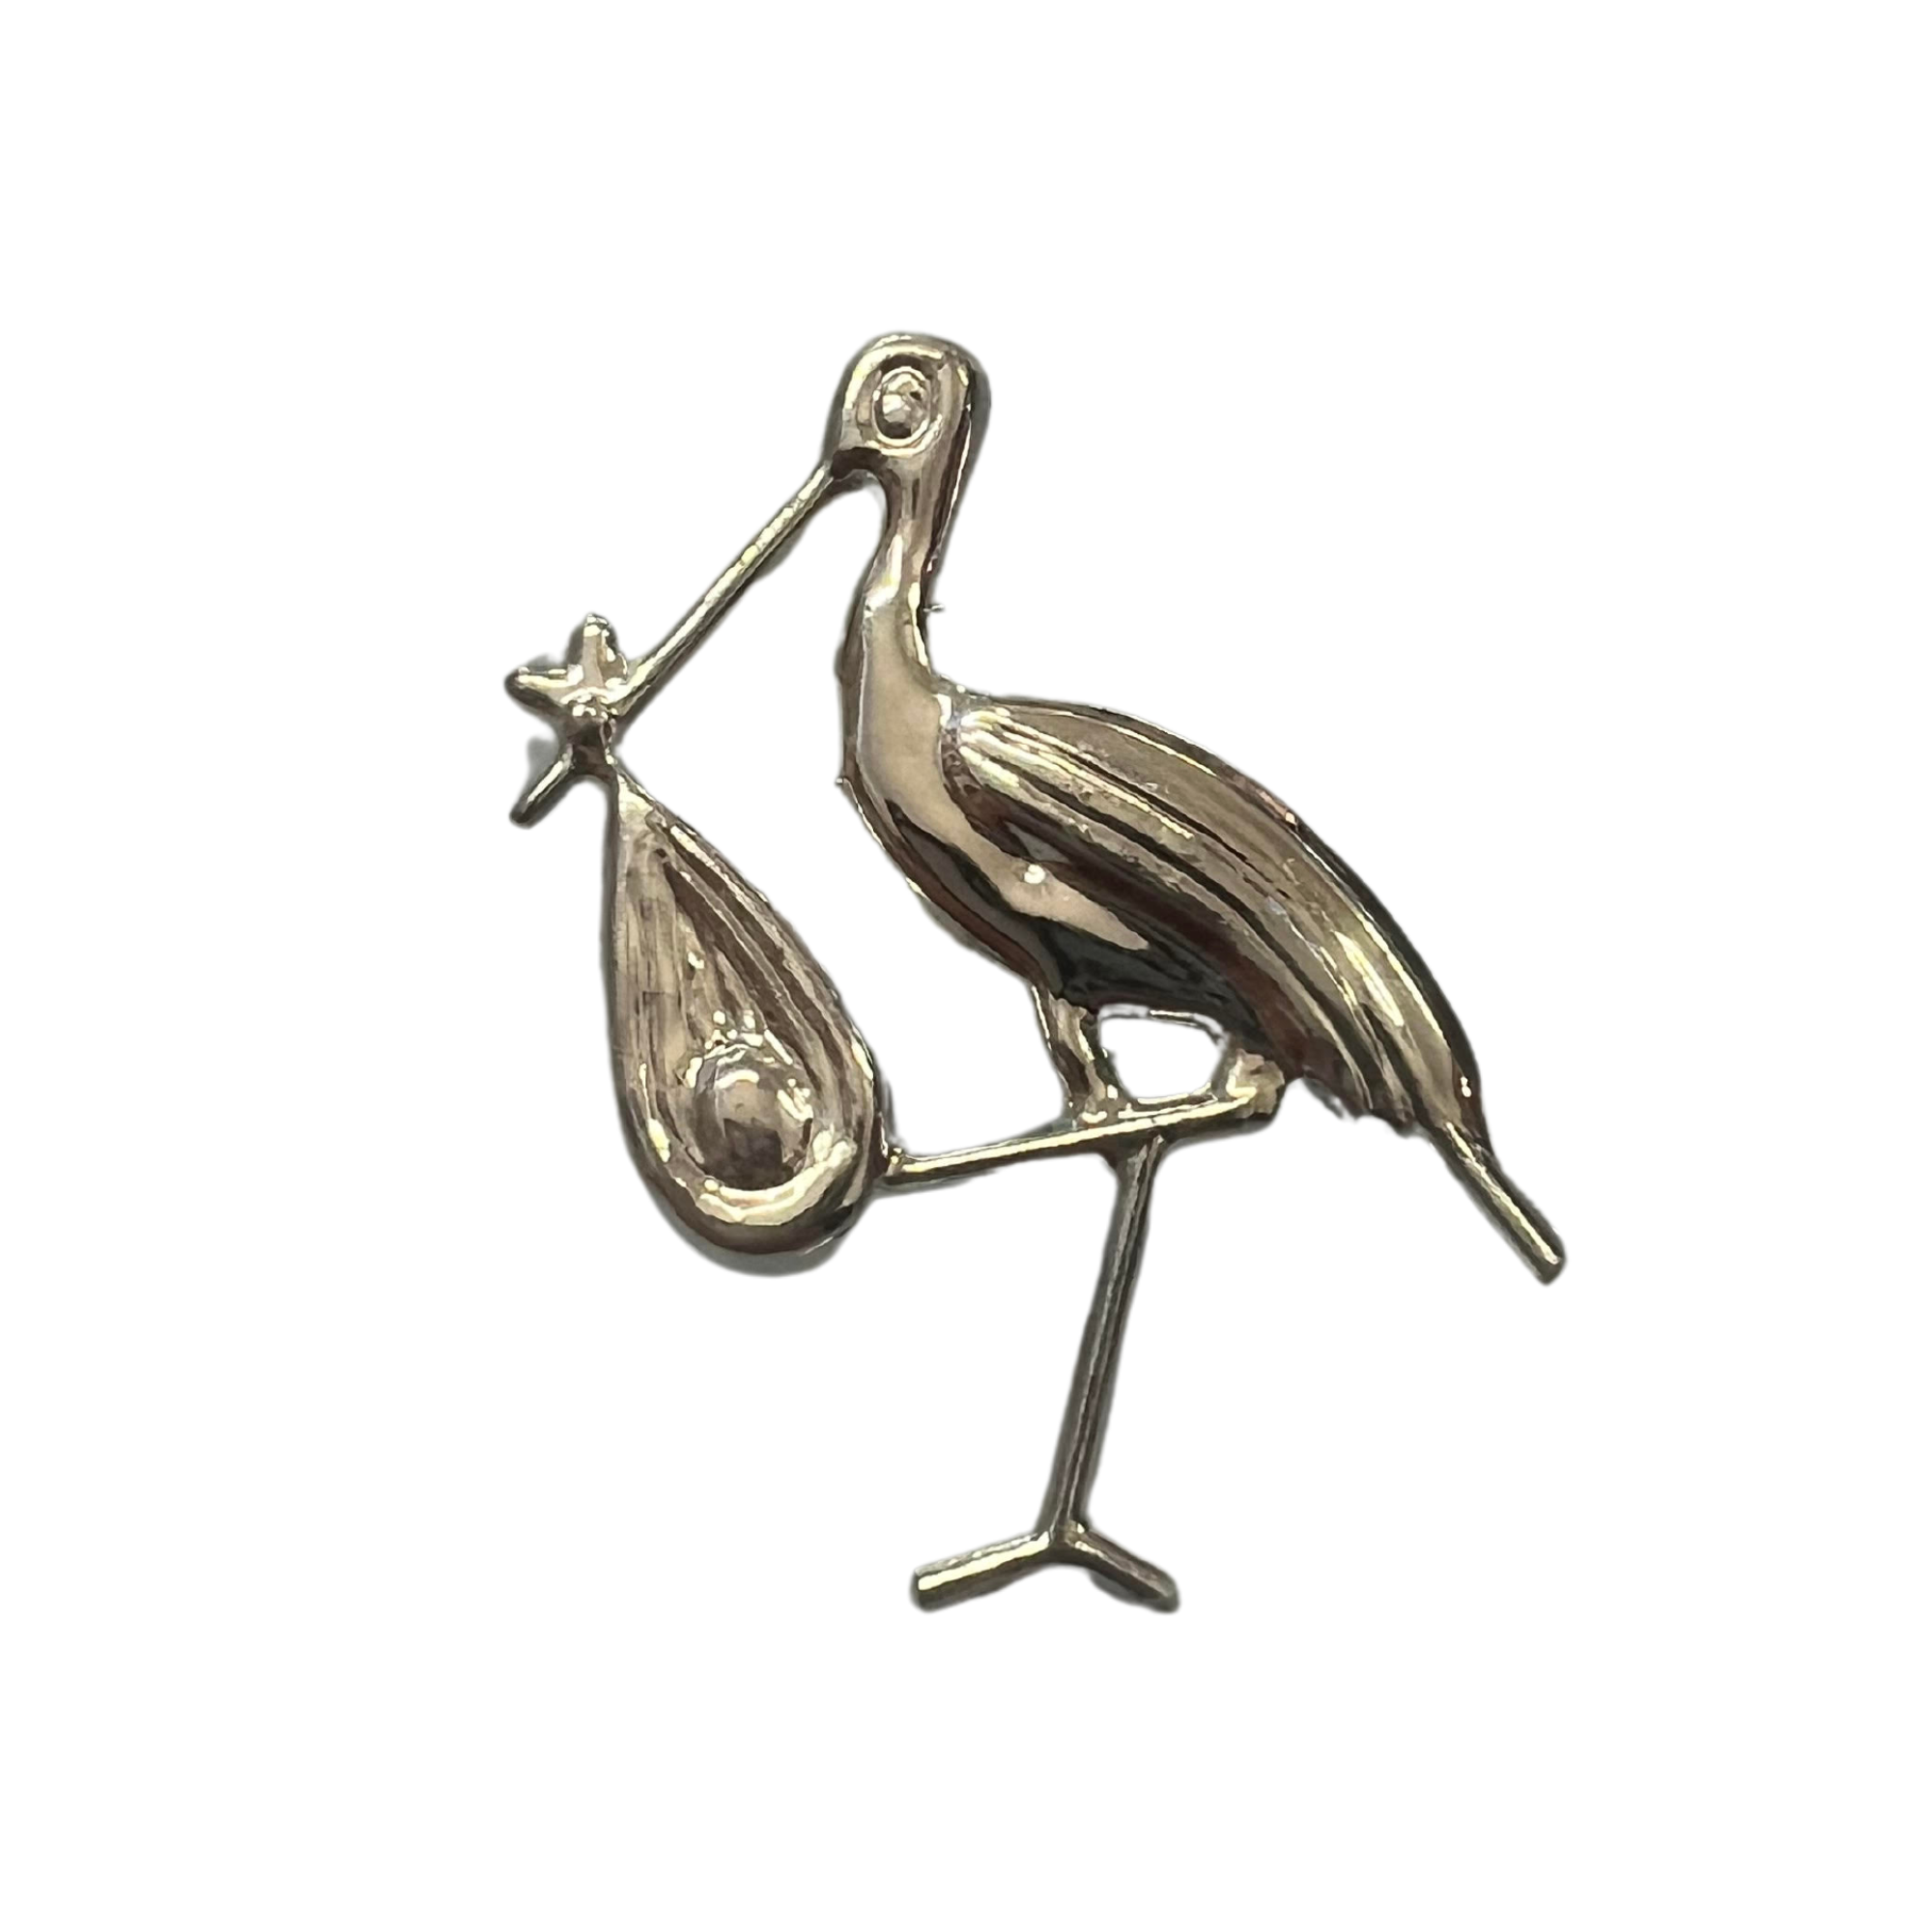 Stork With Baby in Beak Small Silver Plastic Cake / Cupcake Decoration Pick